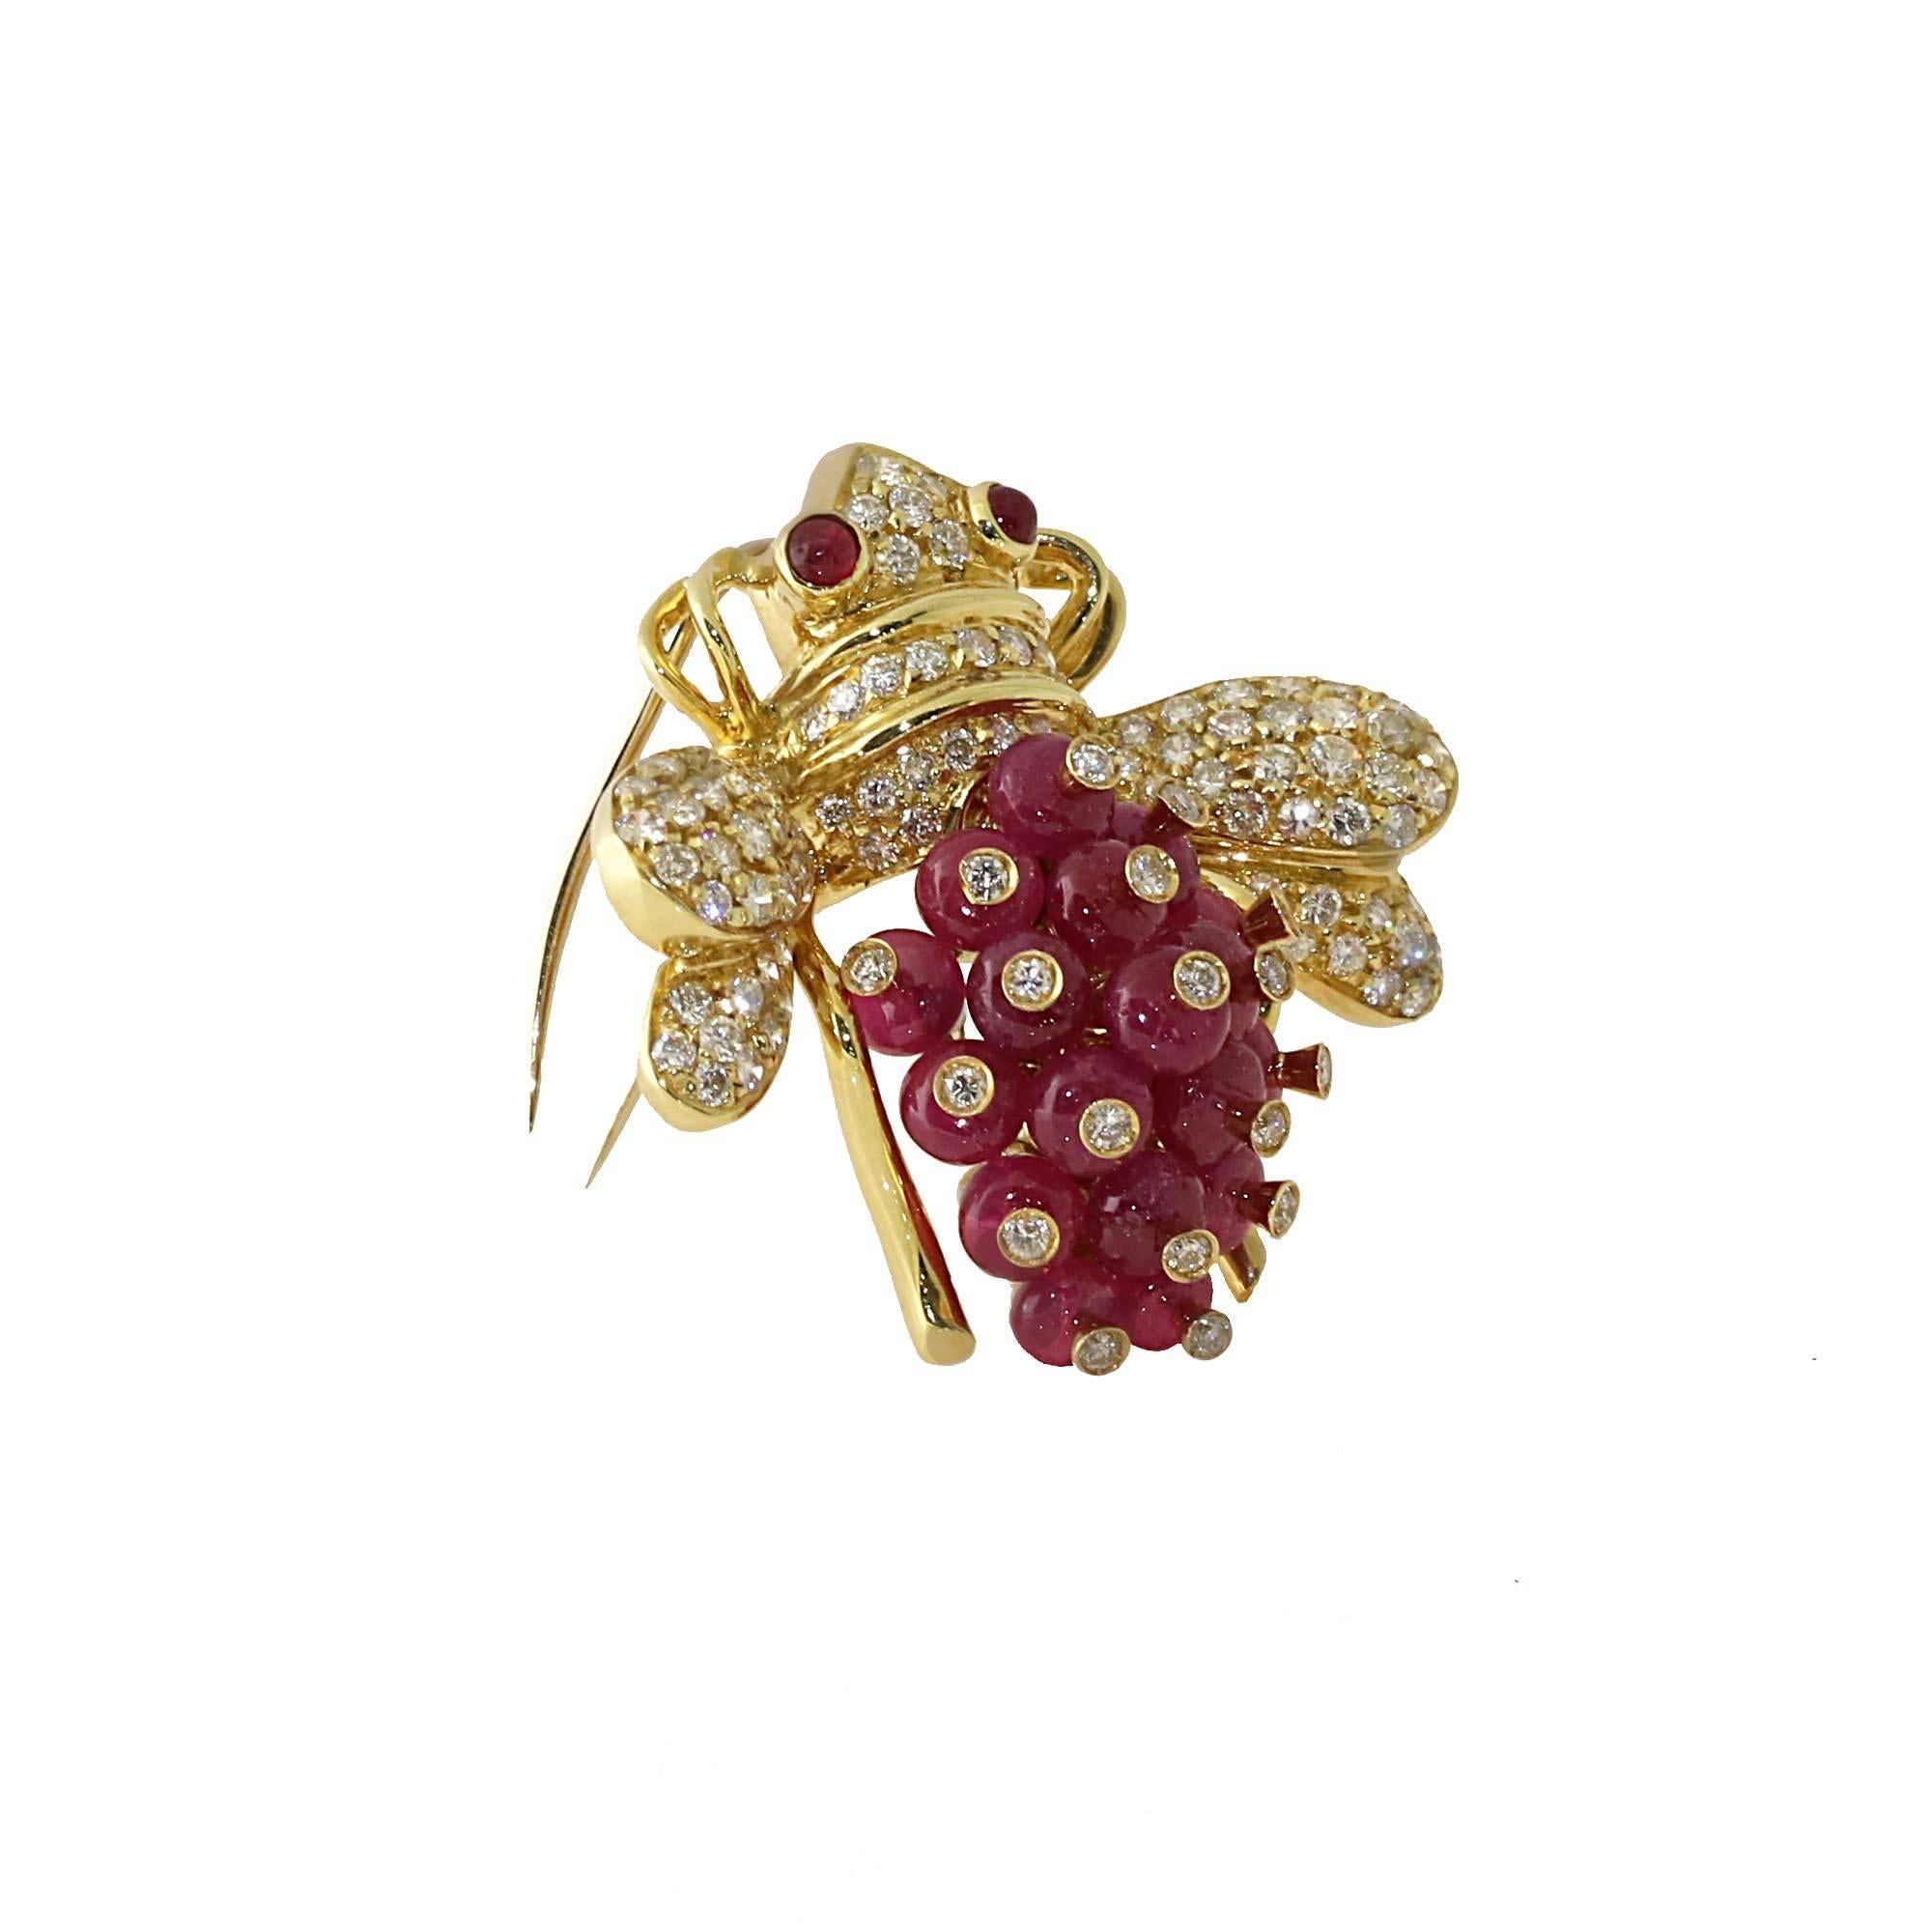 Beautiful and fun Bee pin made in 18k yellow gold. The pin is made with ruby and diamond accents. 
Diamonds weight~ 1.10 ctw
16.3 grams of gold

Pin measures 3cm long x  3.25cm wide 